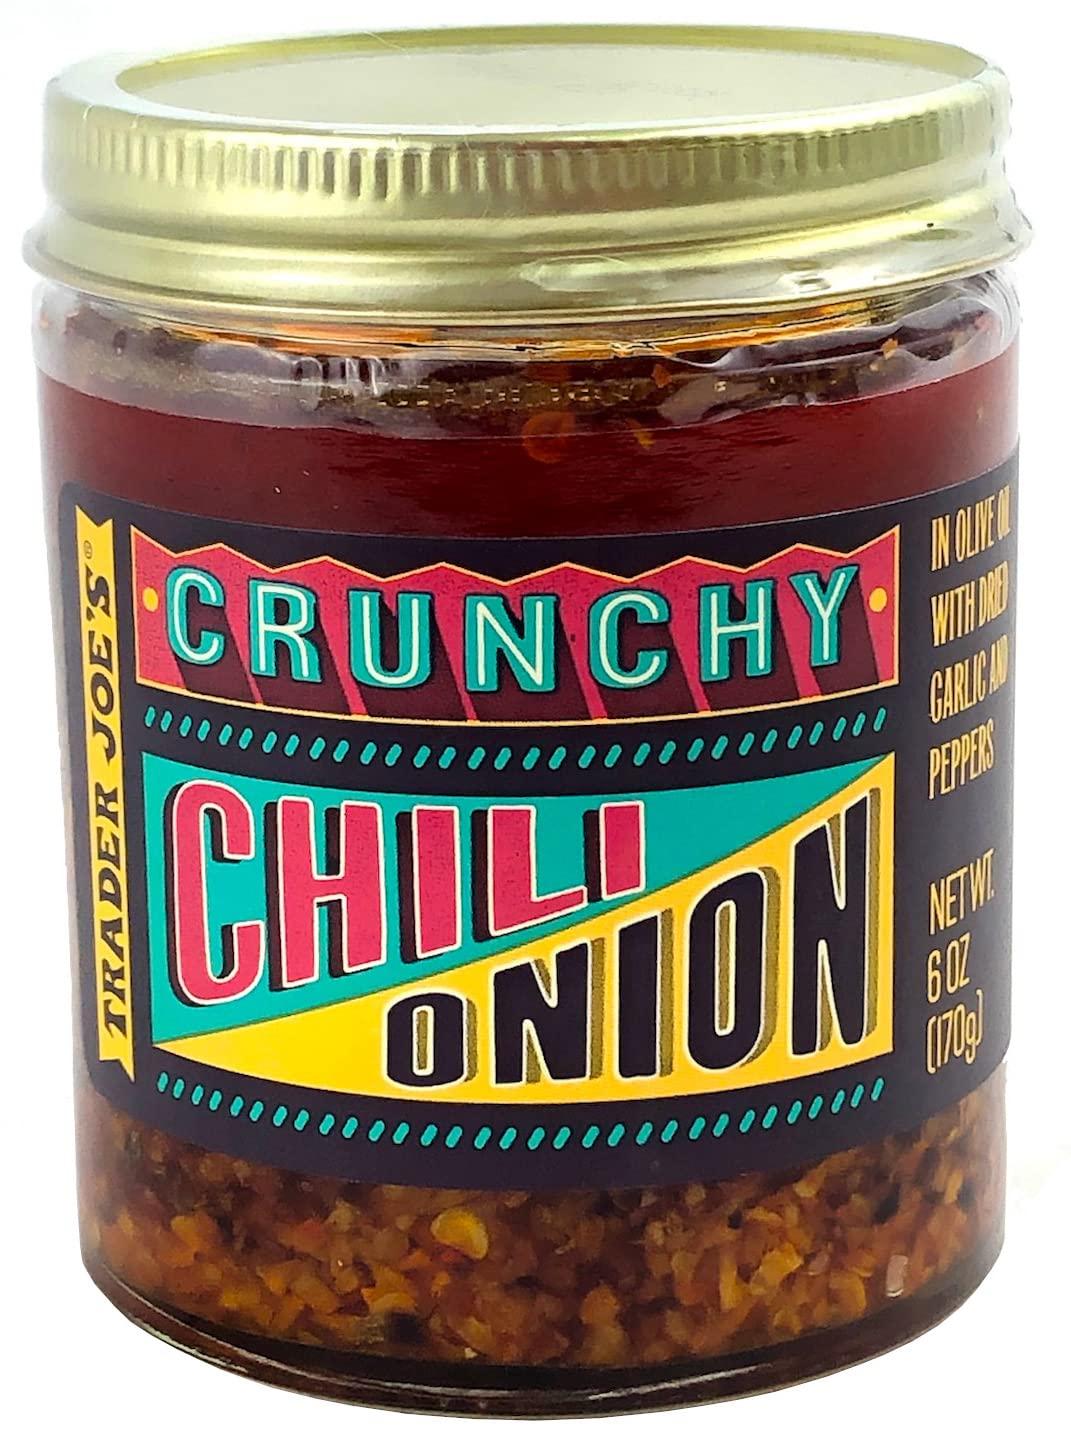 recipes with chili onion crunch